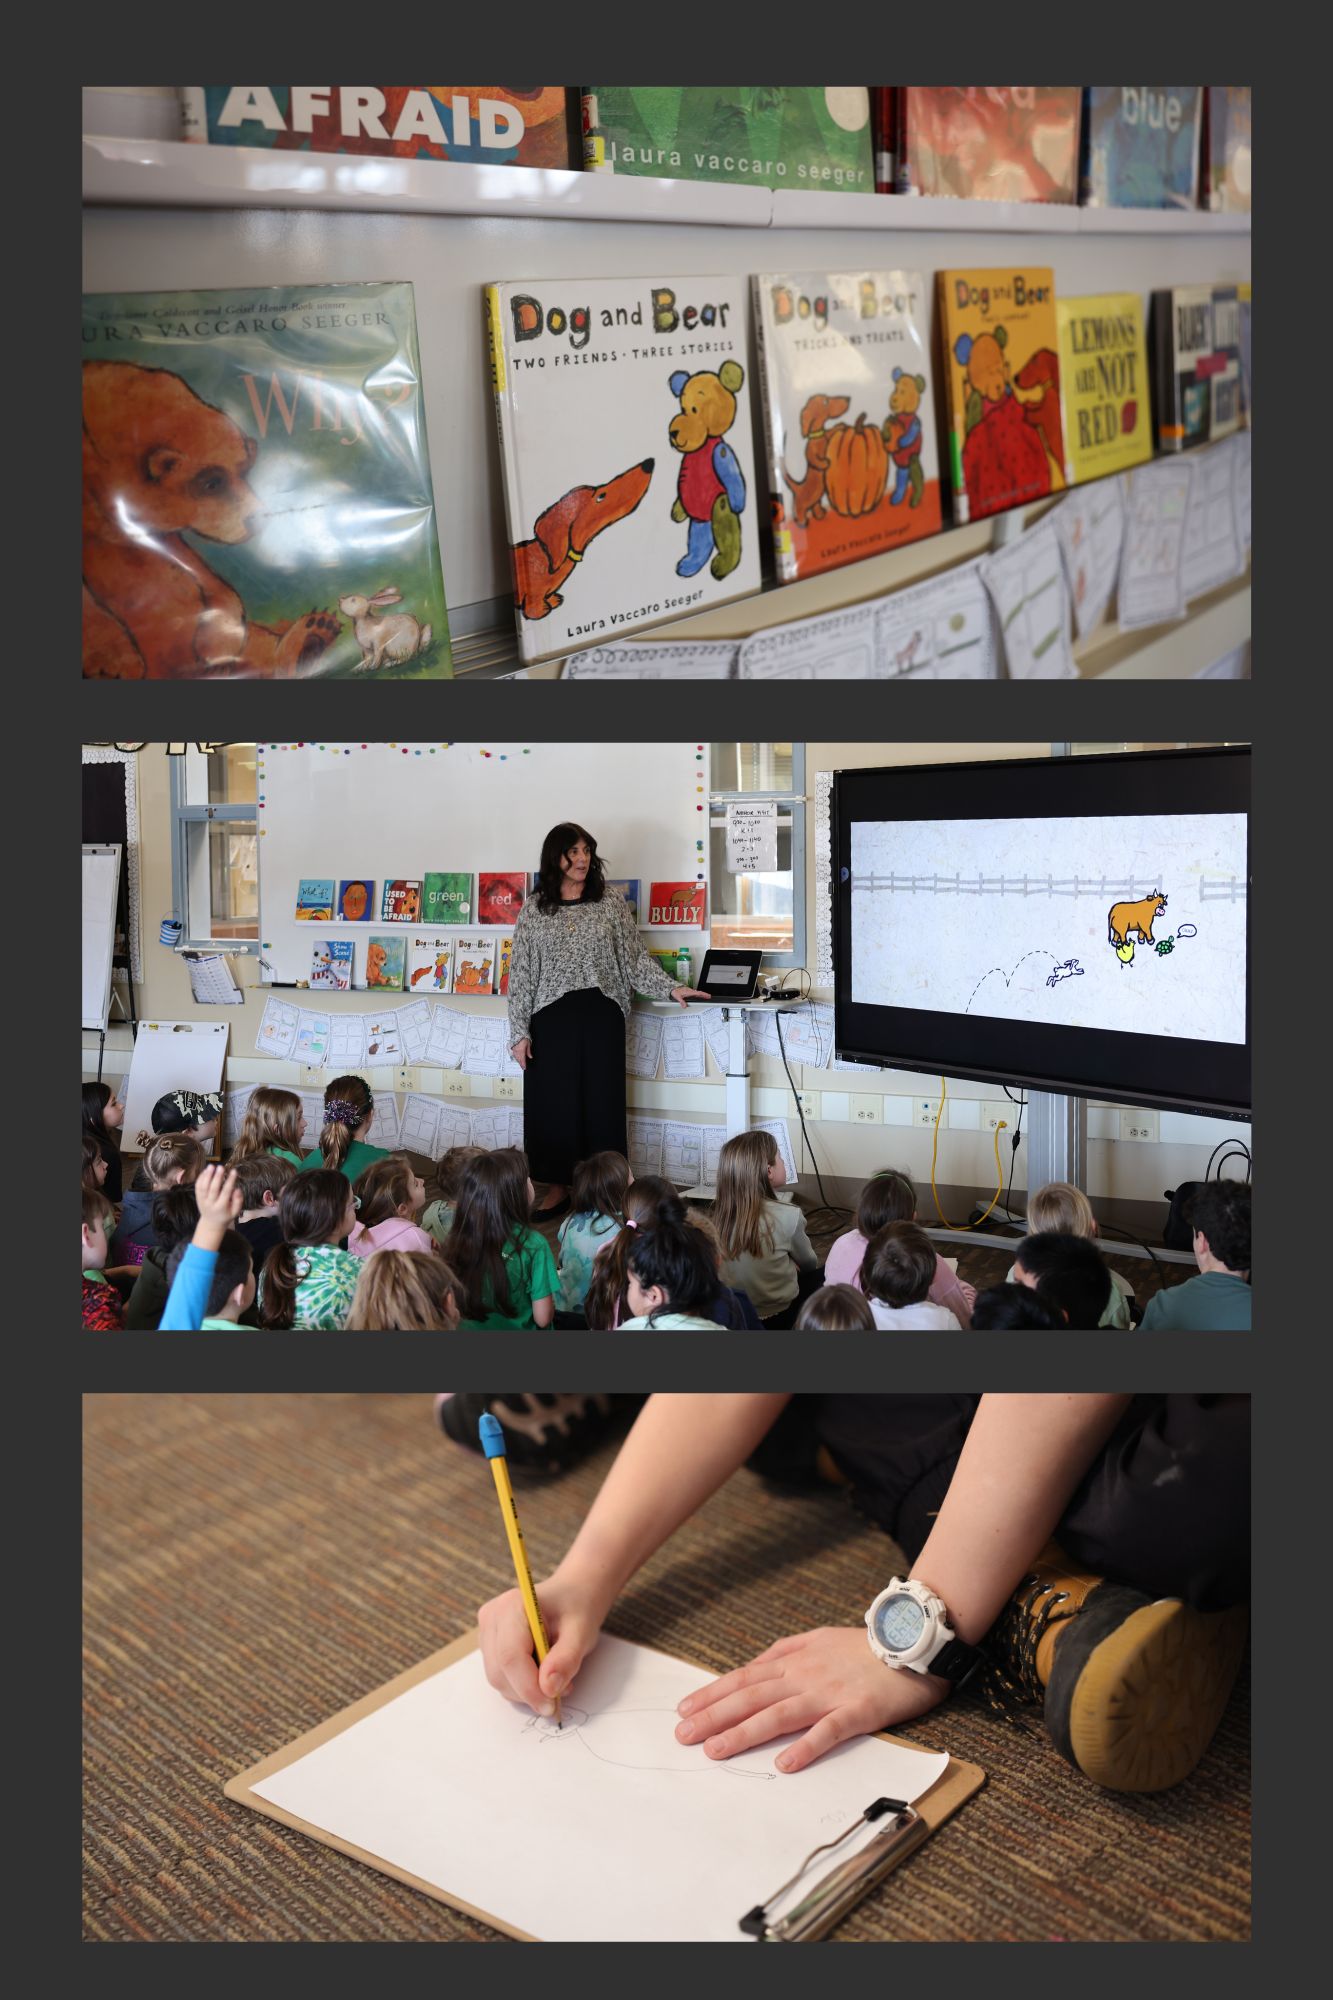 Photo Collage, from top to bottom: a photo of books by Laura Vaccaro Seeger, Laura giving a presentation to students, and a child creating an illustration.